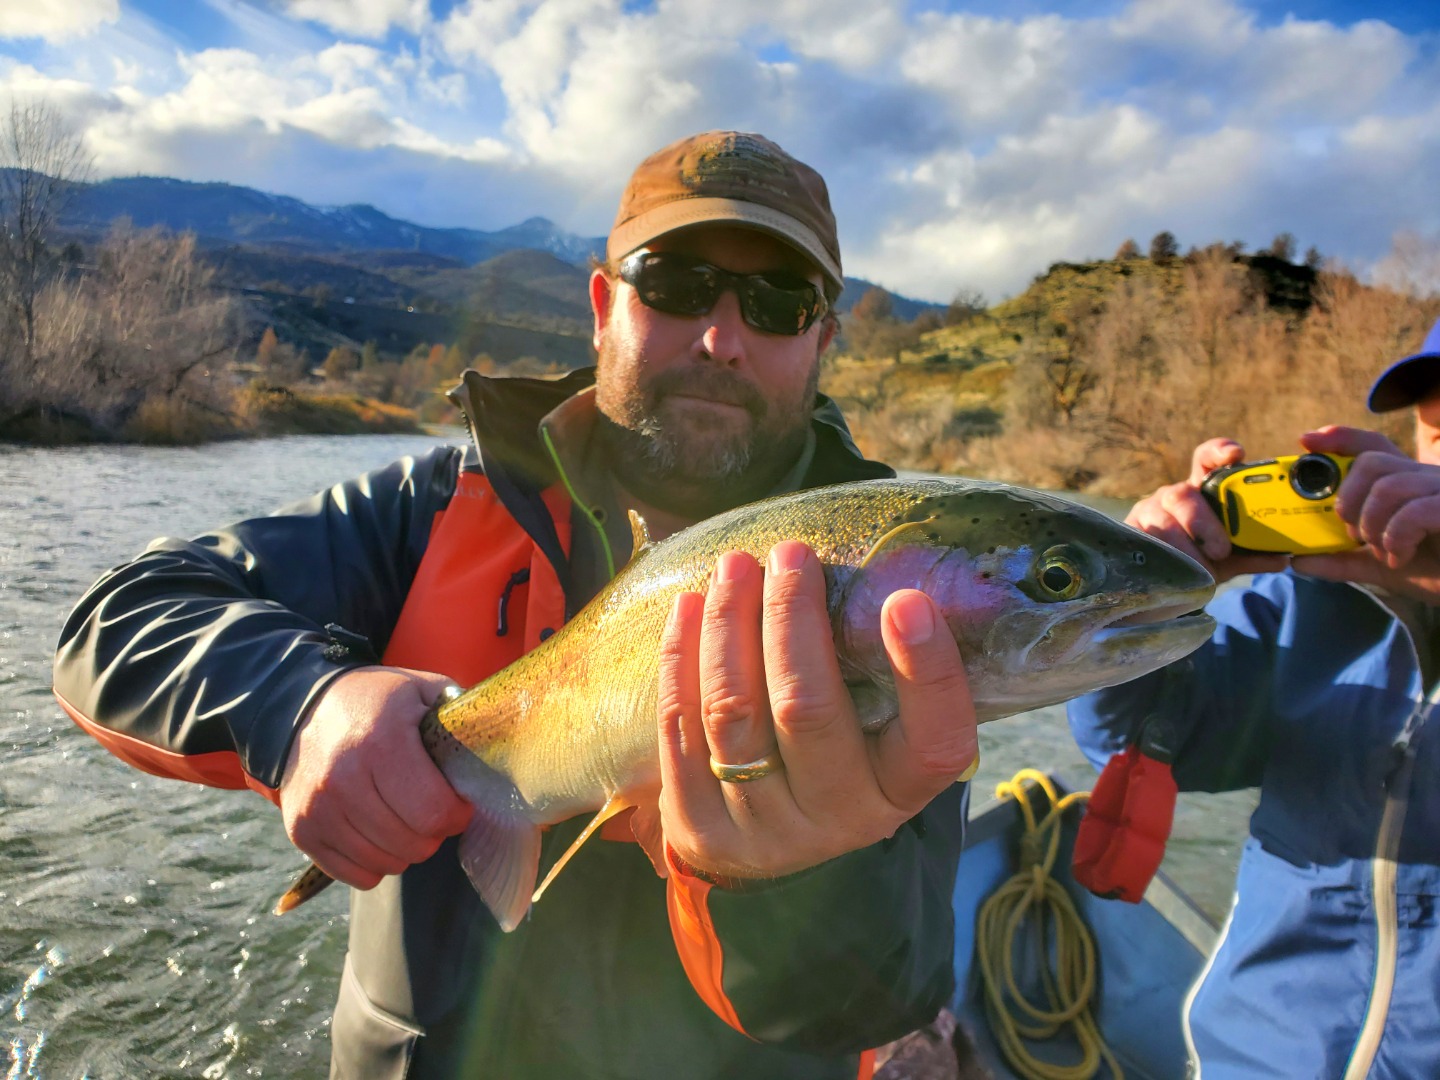 A Picture Perfect Day on the Klamath